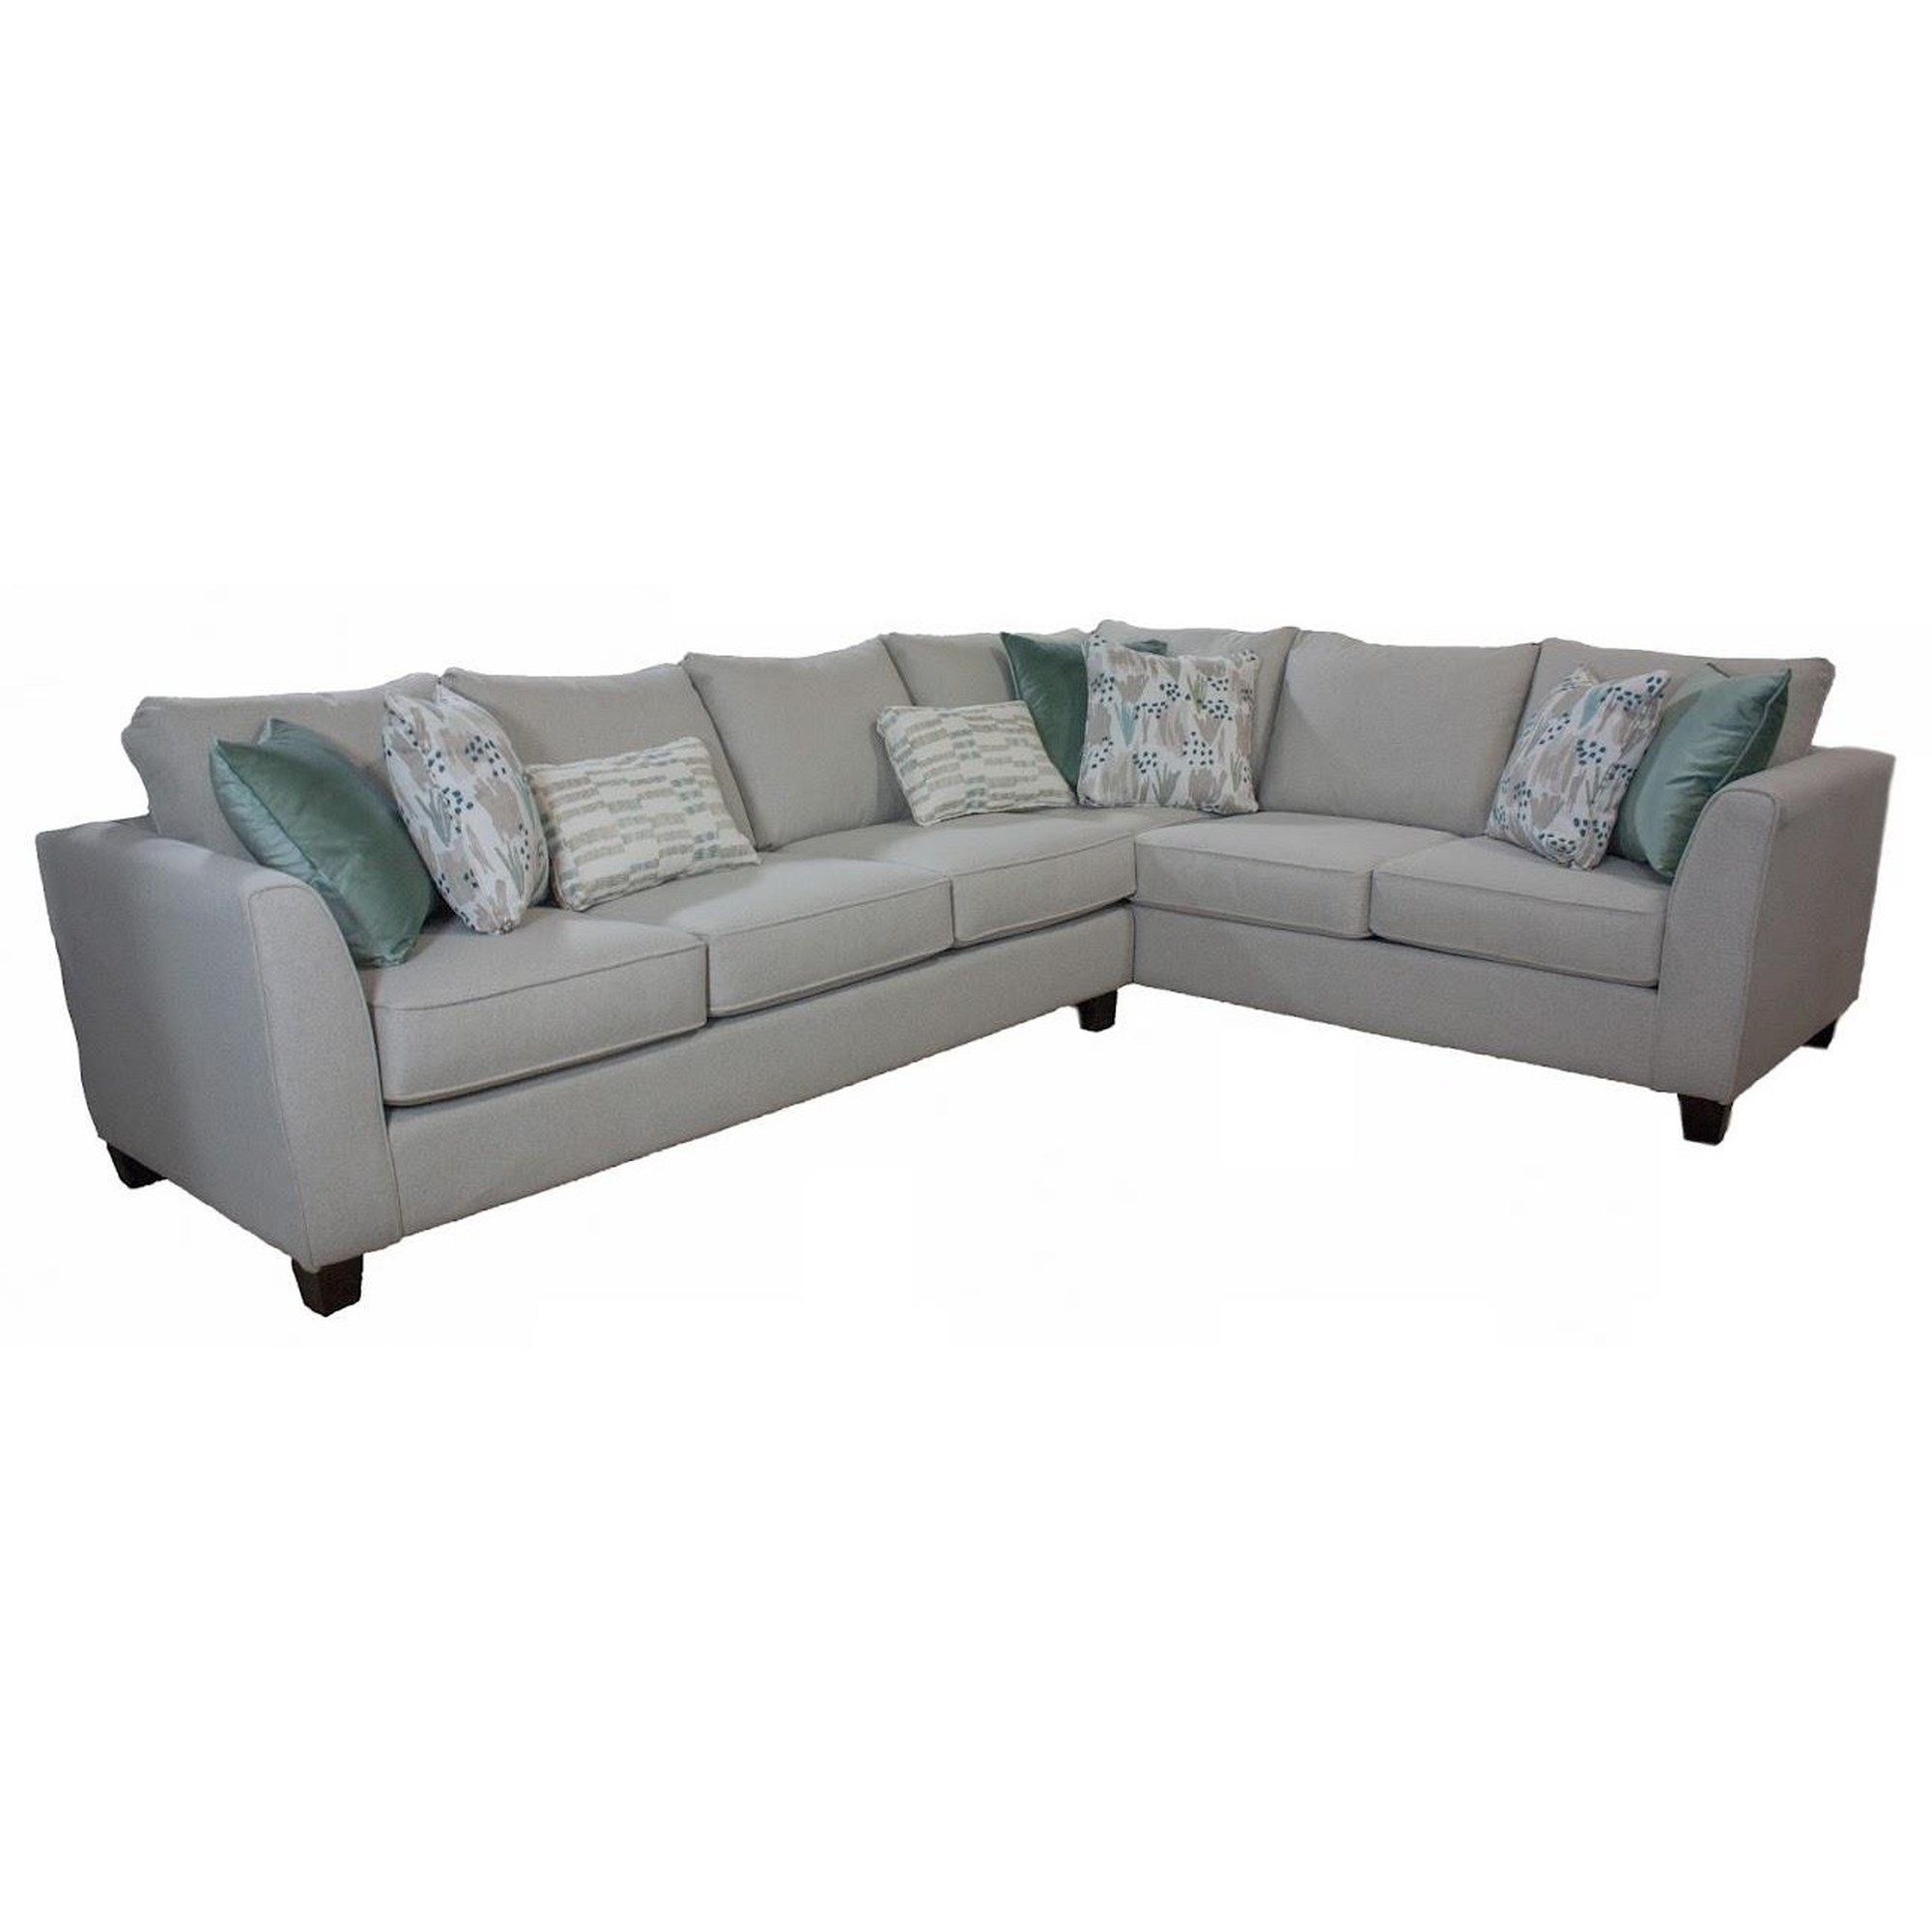 Fusion Furniture 28 WENDY LINEN 28-31L/33R-WENDYLINE 2 Piece Sectional with  Flare Tapered Arms, Esprit Decor Home Furnishings